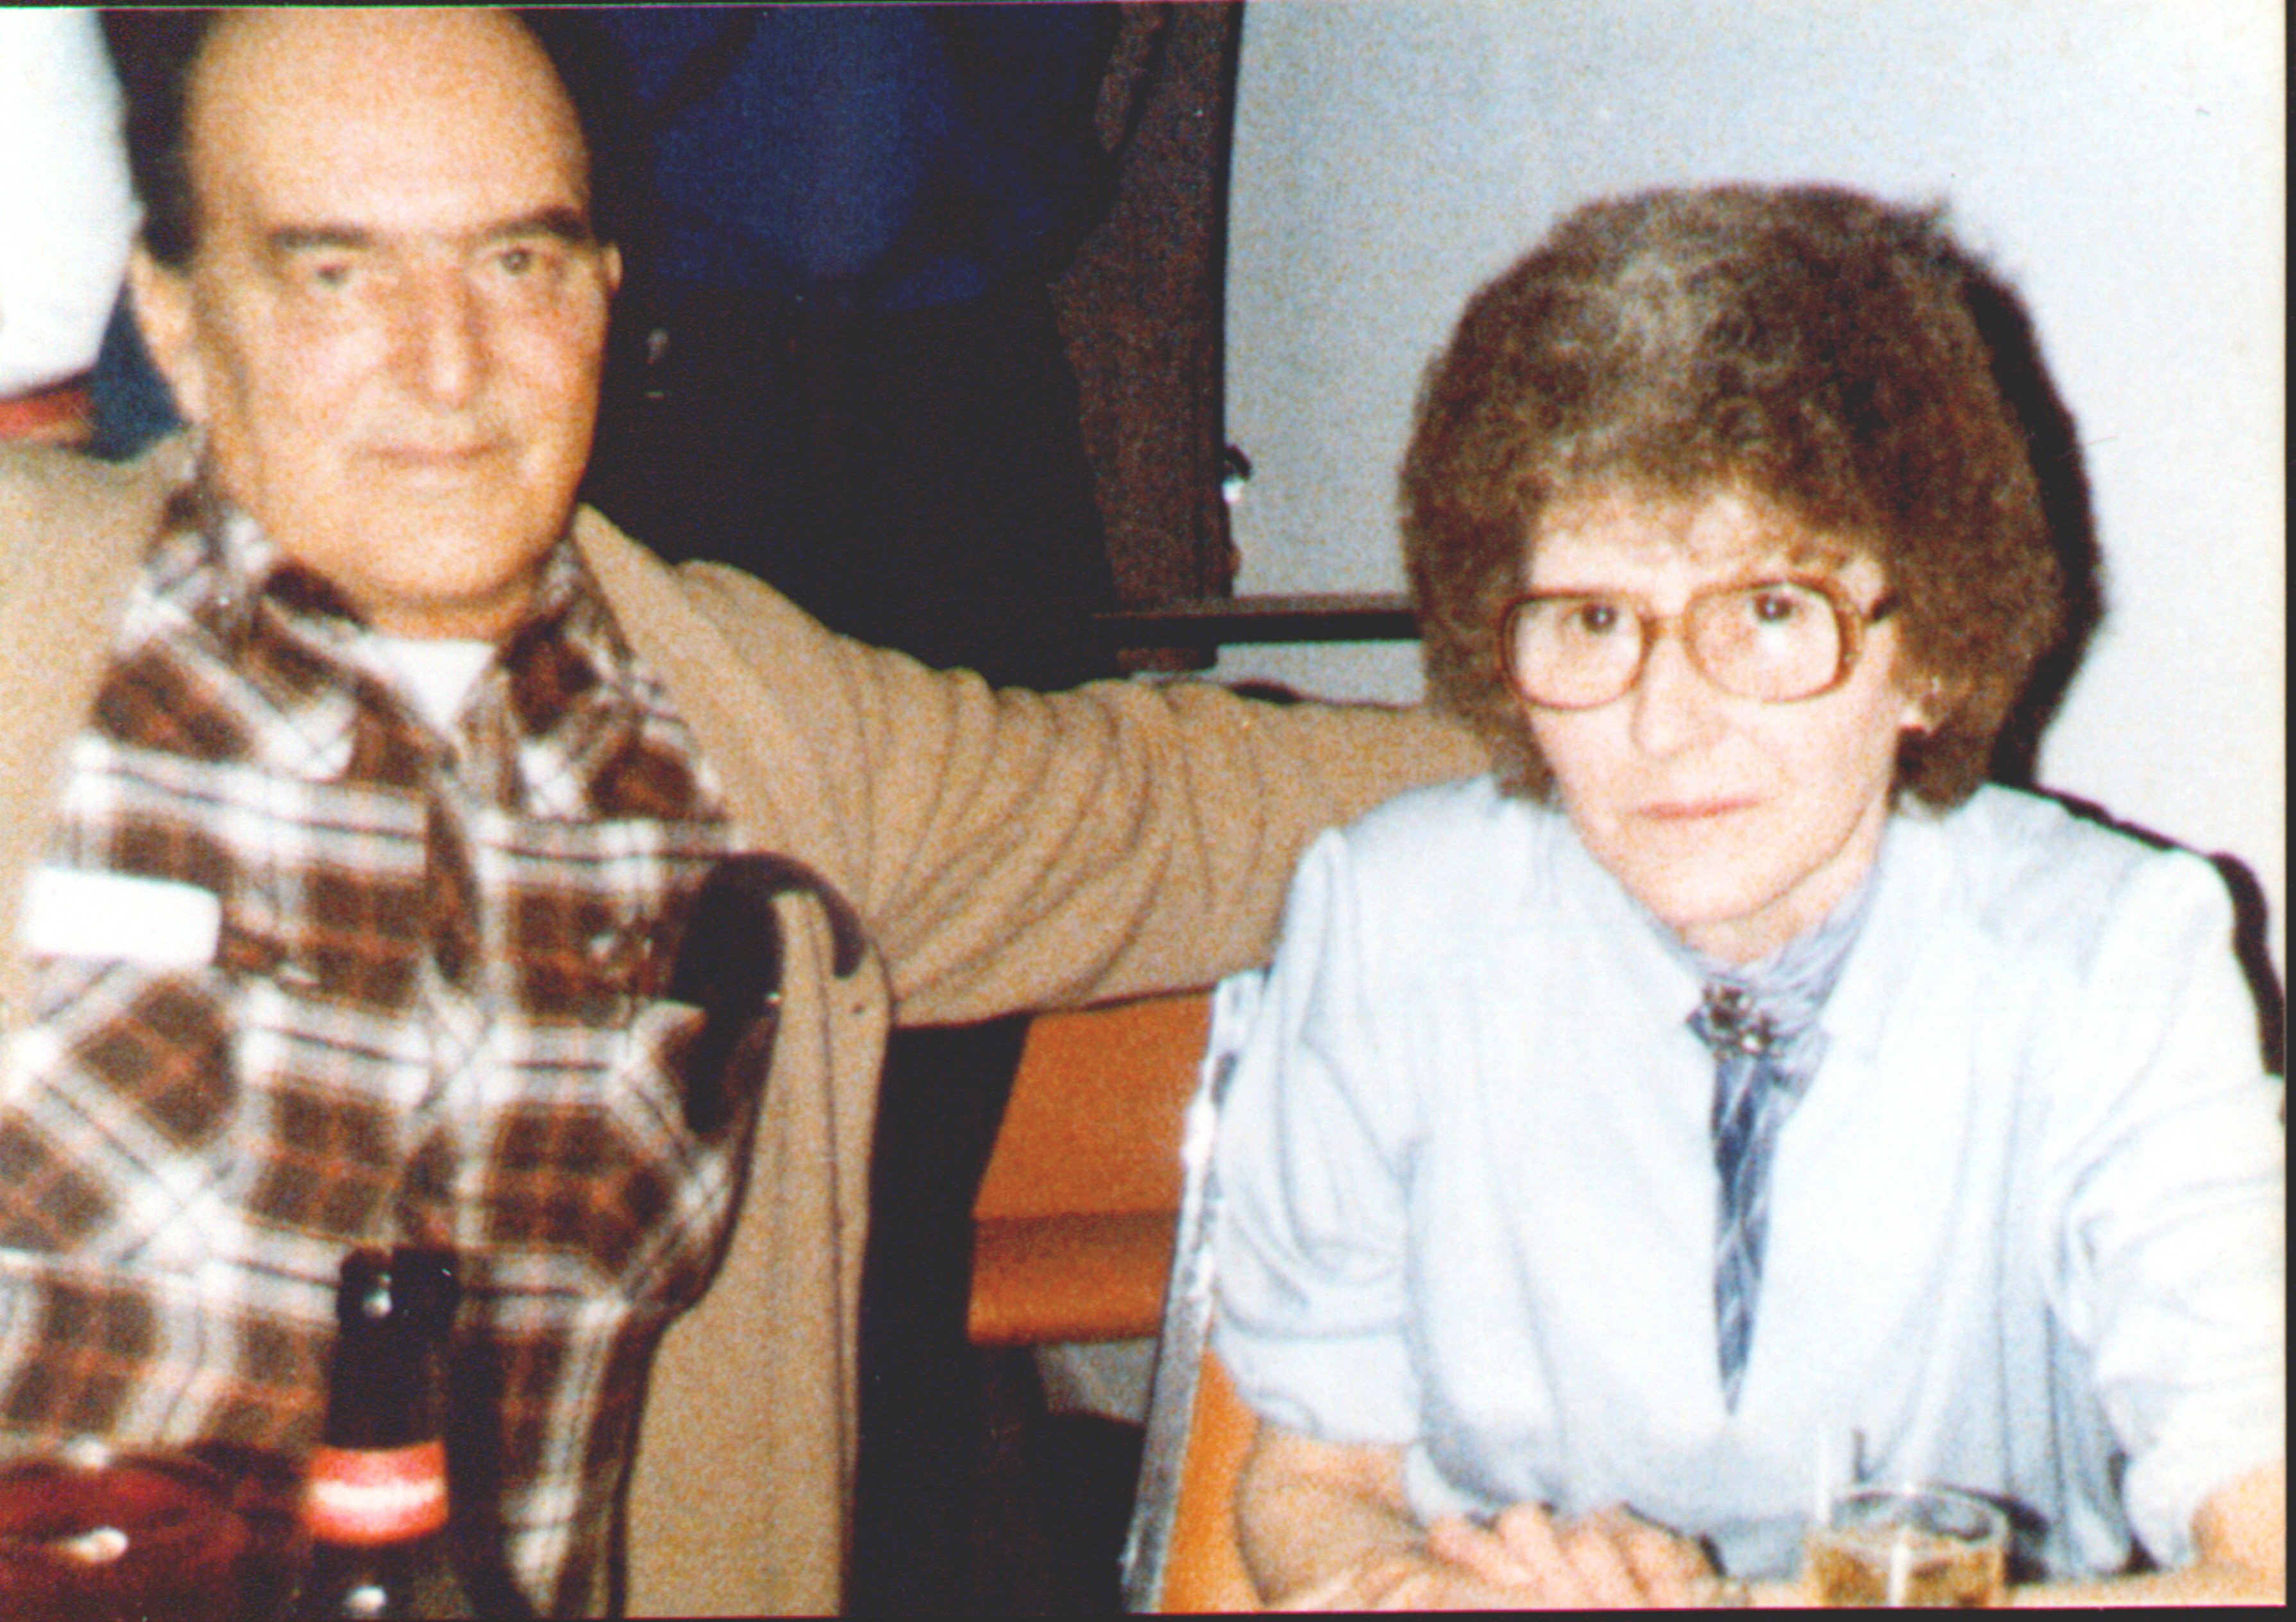 Glenna Tennien and Clarence R. Chagnon